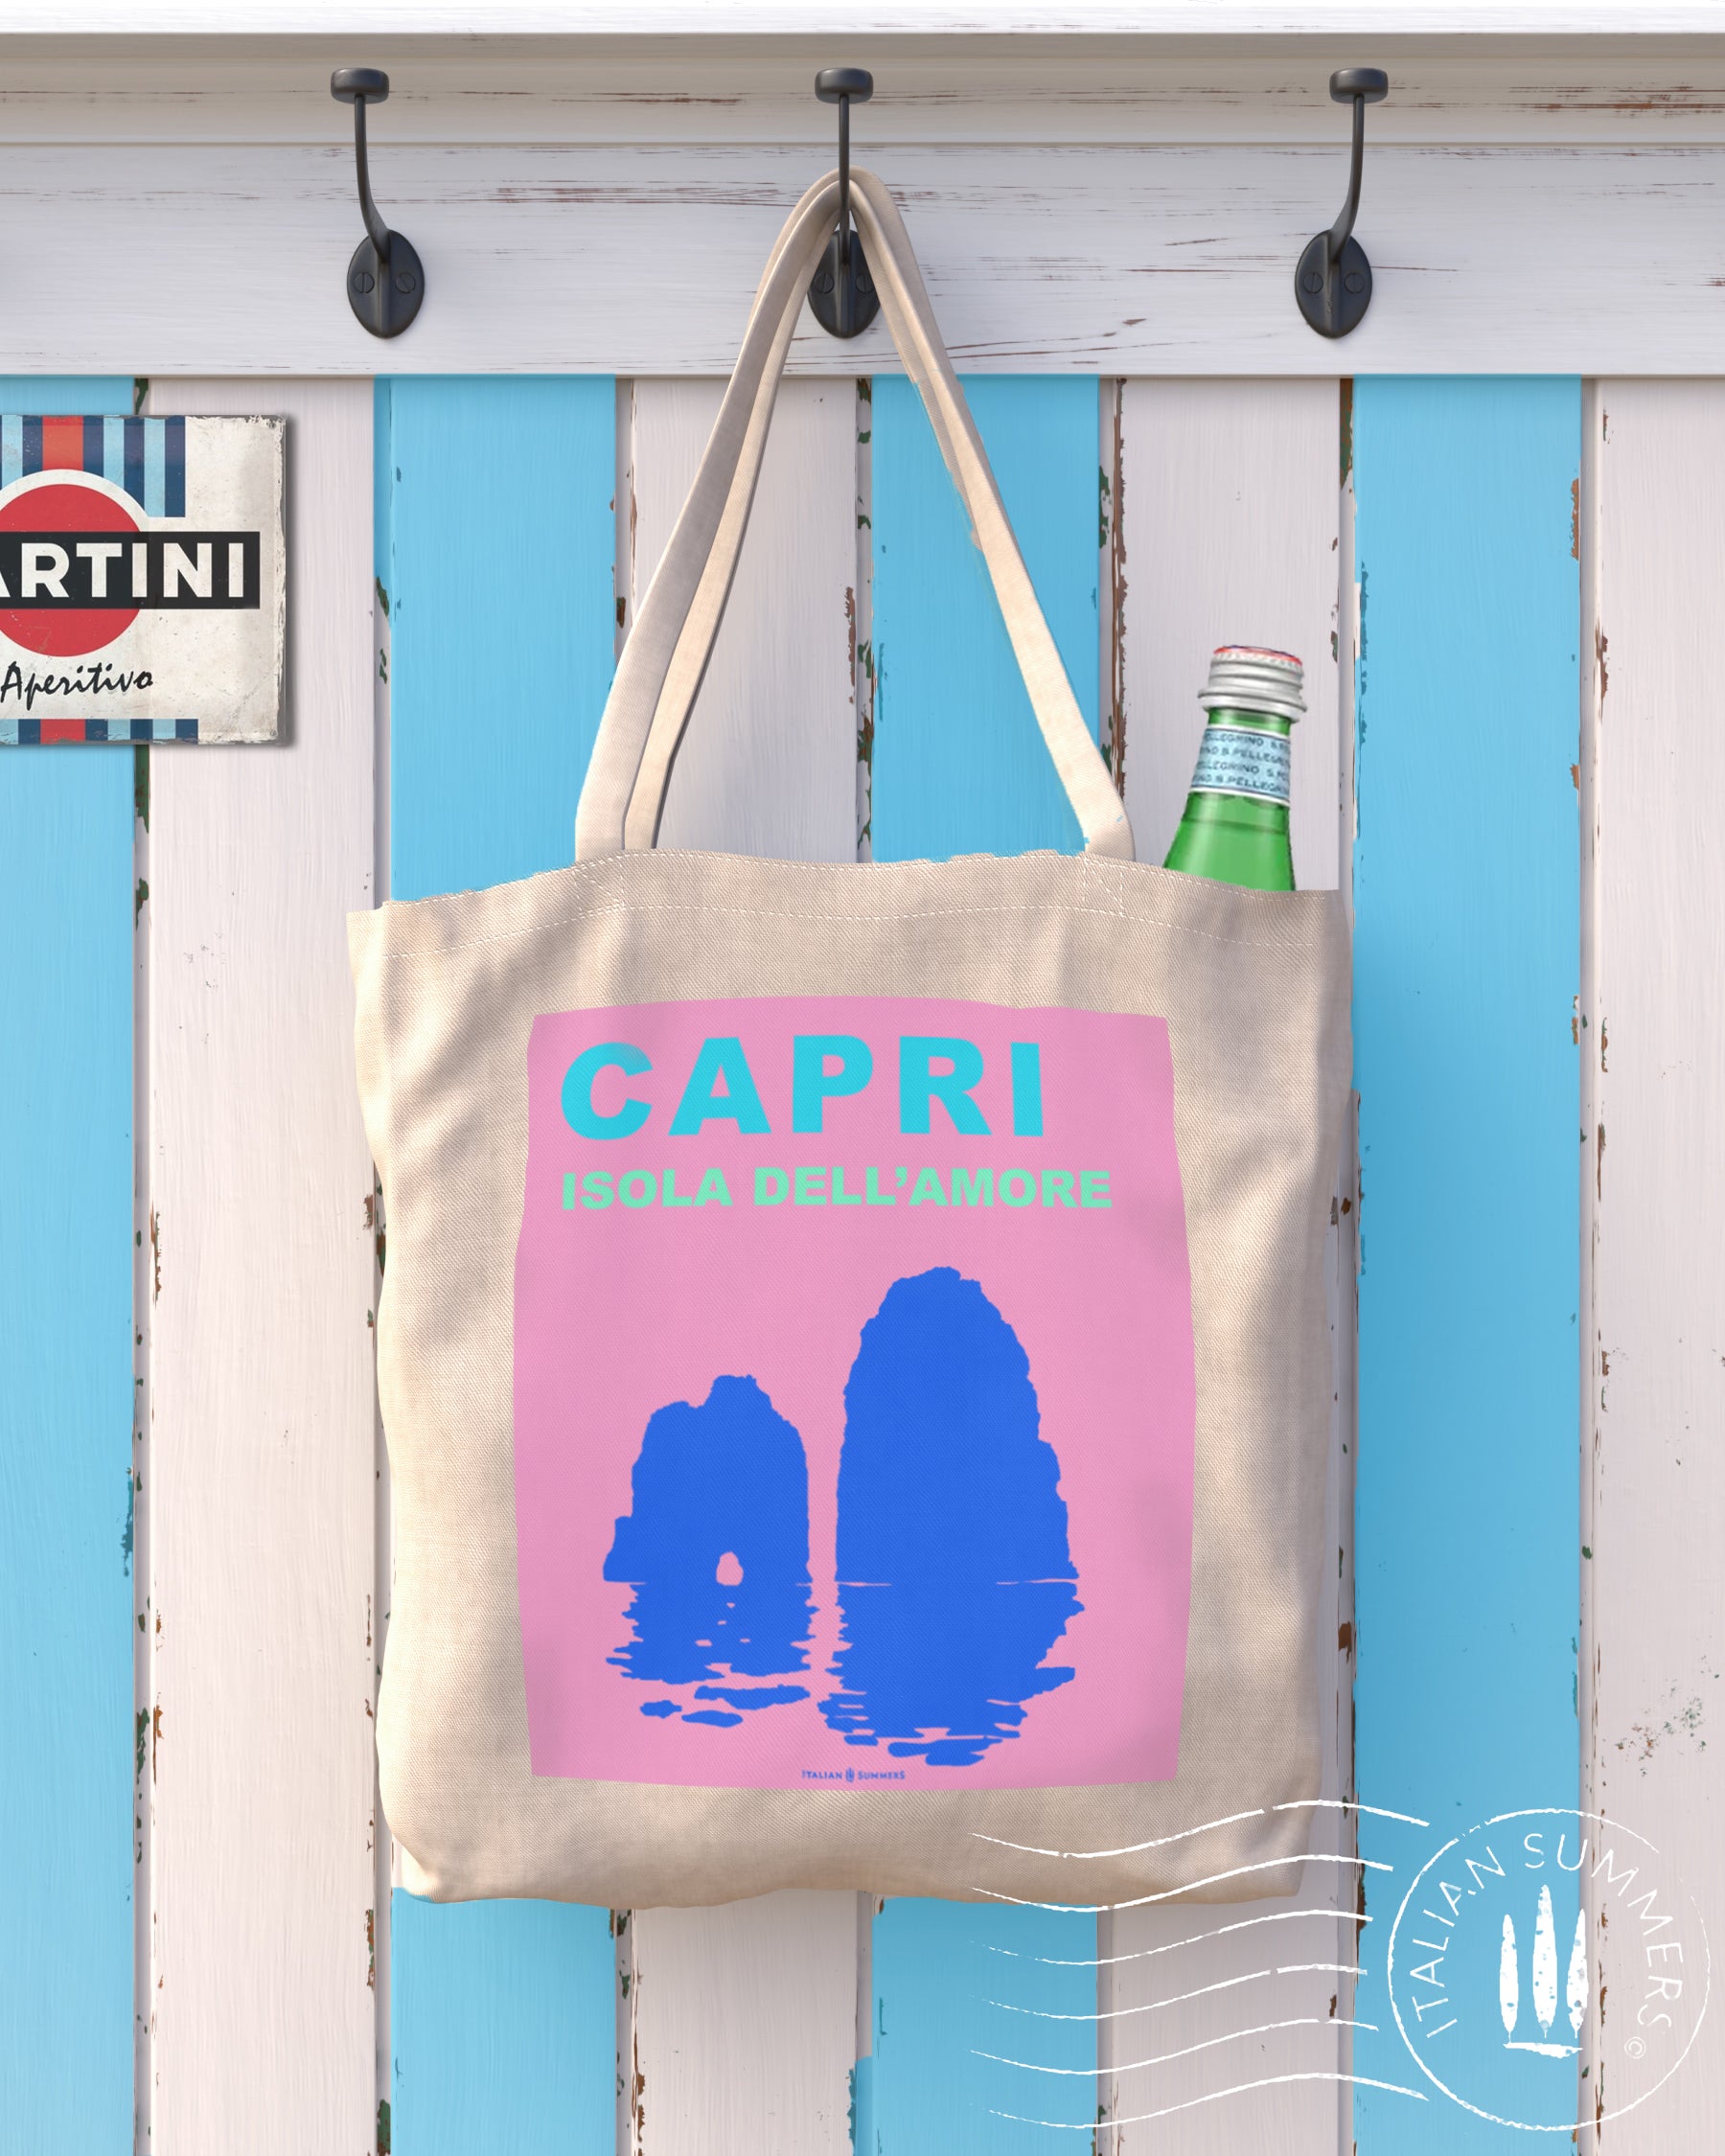 Italy inspired tote bag that represents a lilac field containing a turqoise Capri text and under that the text Isola del Amore means Isand of love. Under the text there is the silhouet of the Faraglioni in cobalt blue color. Designed by Italian Summers